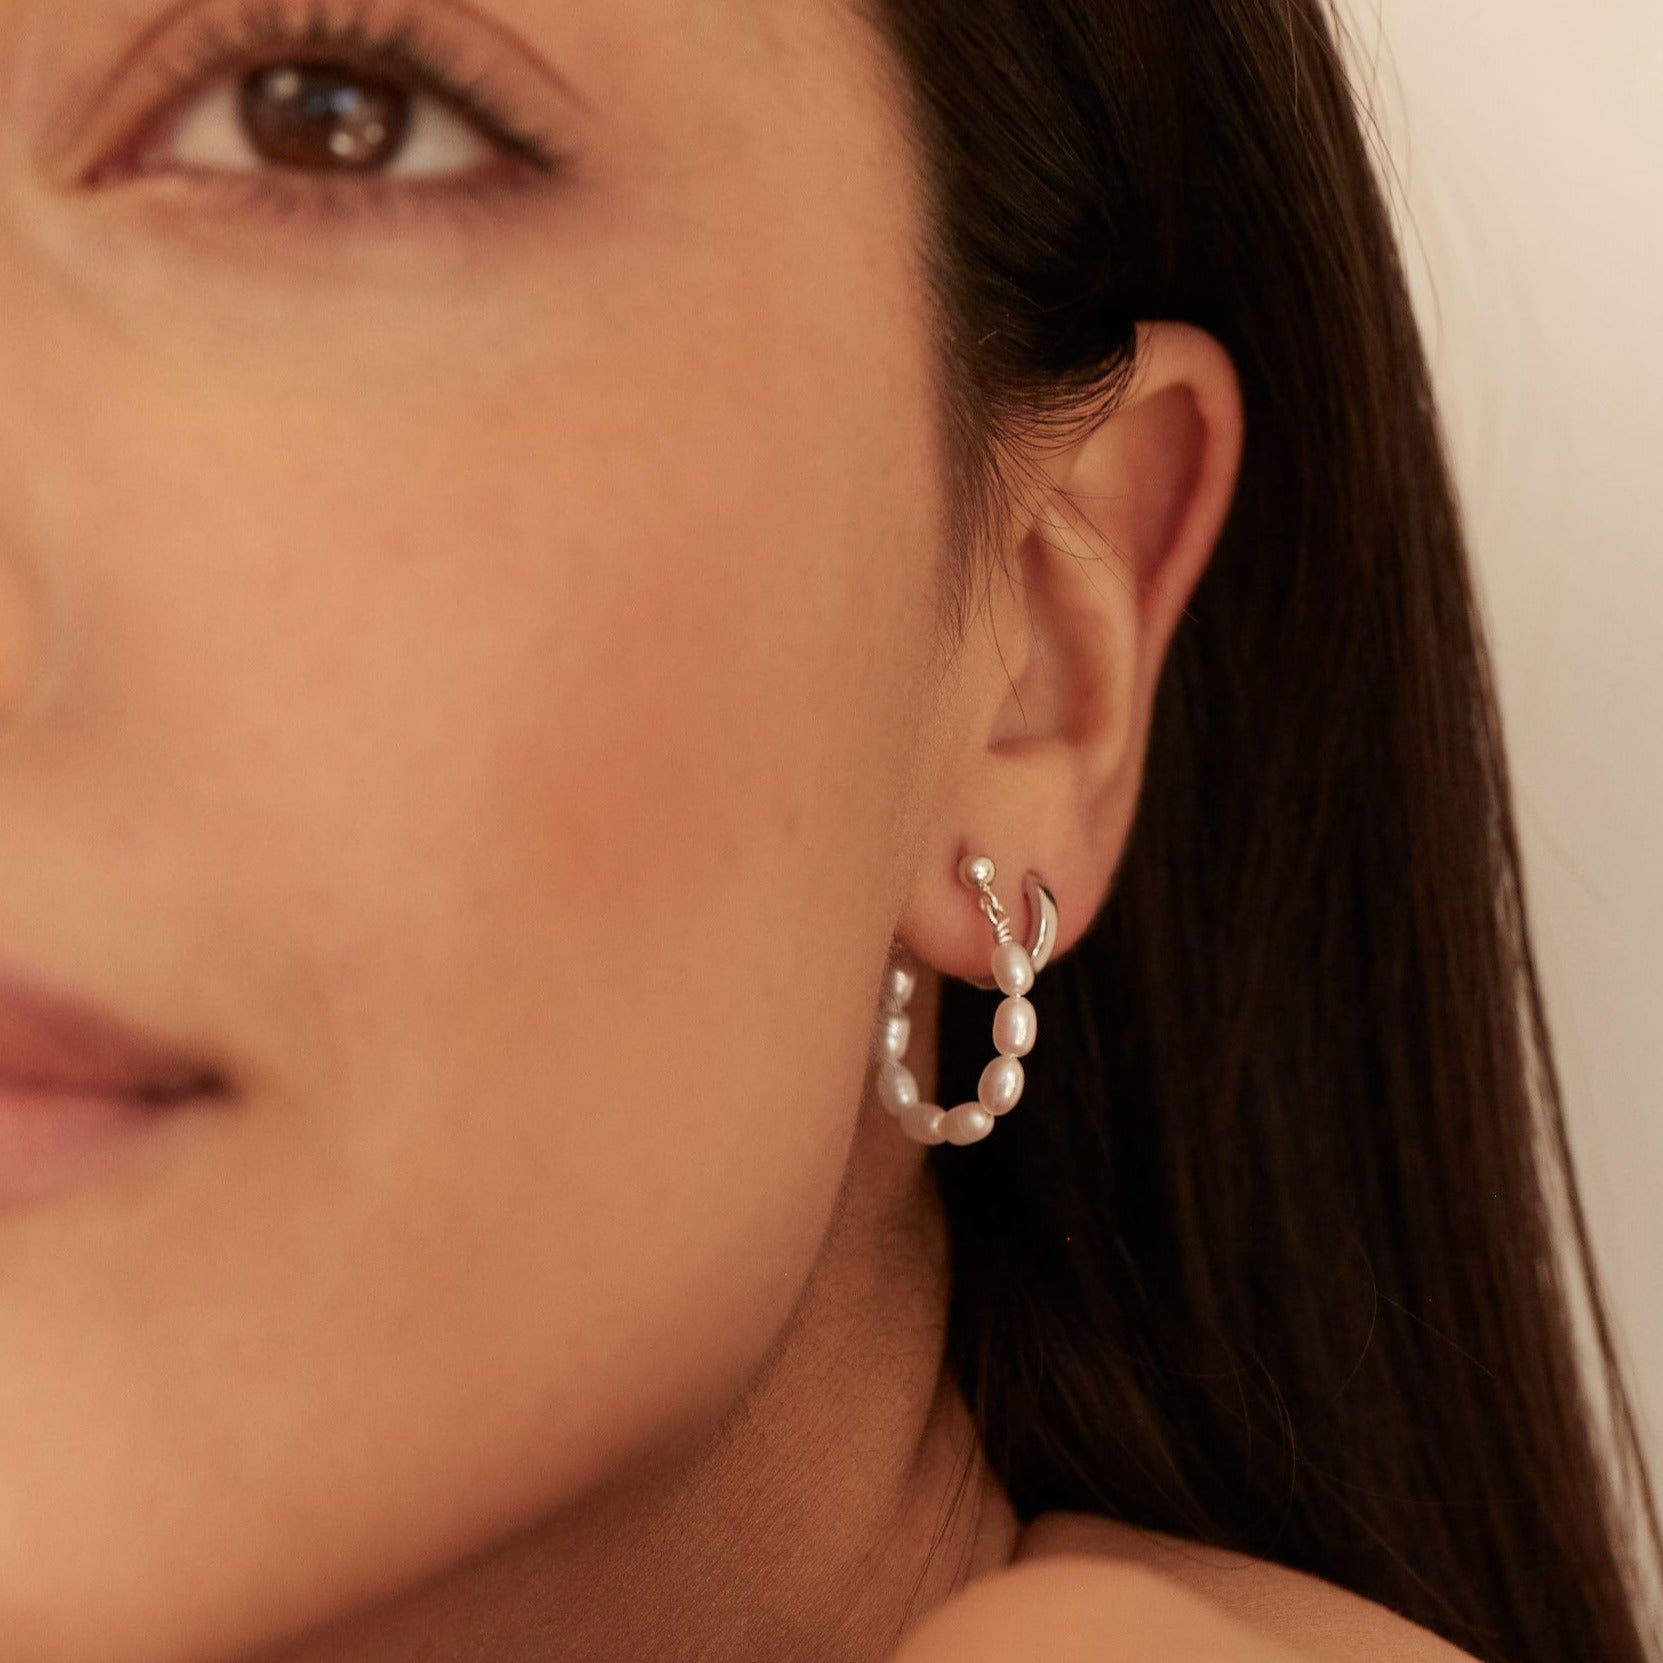 Silver seed pearl hoop earring in an ear lobe close up, paired with a silver huggie hoop earring